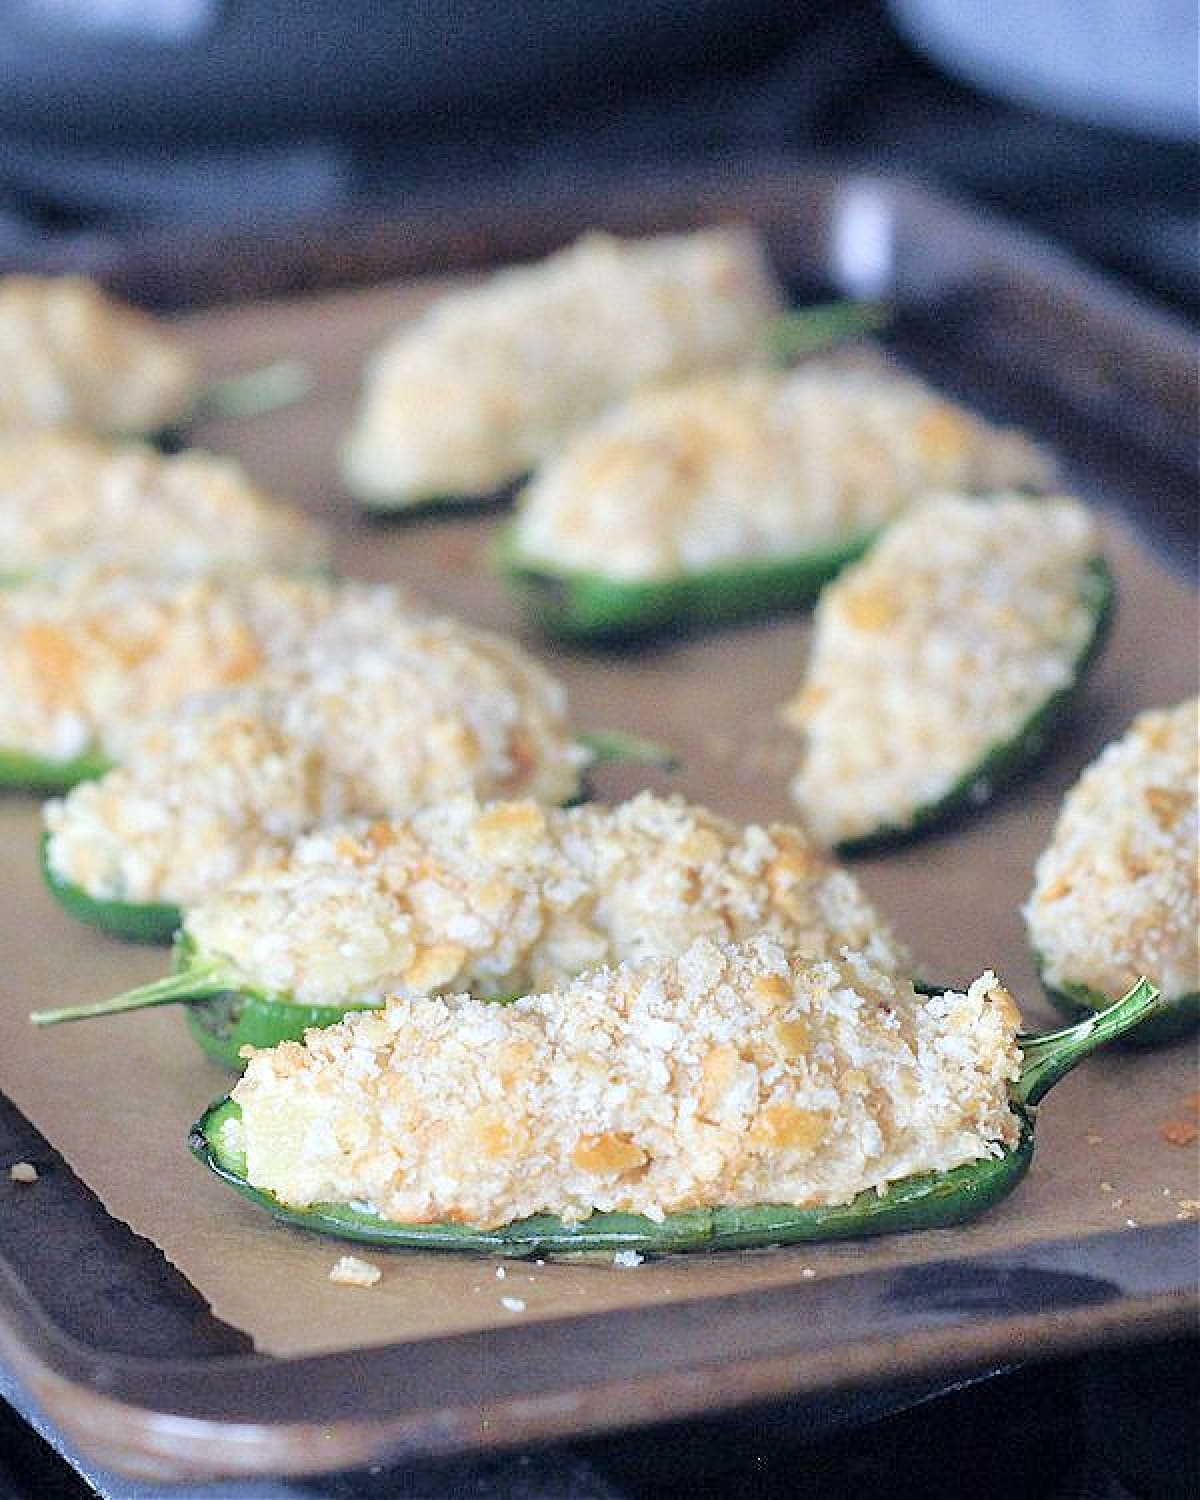 Pineapple jalapeño poppers with cracker breading on a baking sheet.